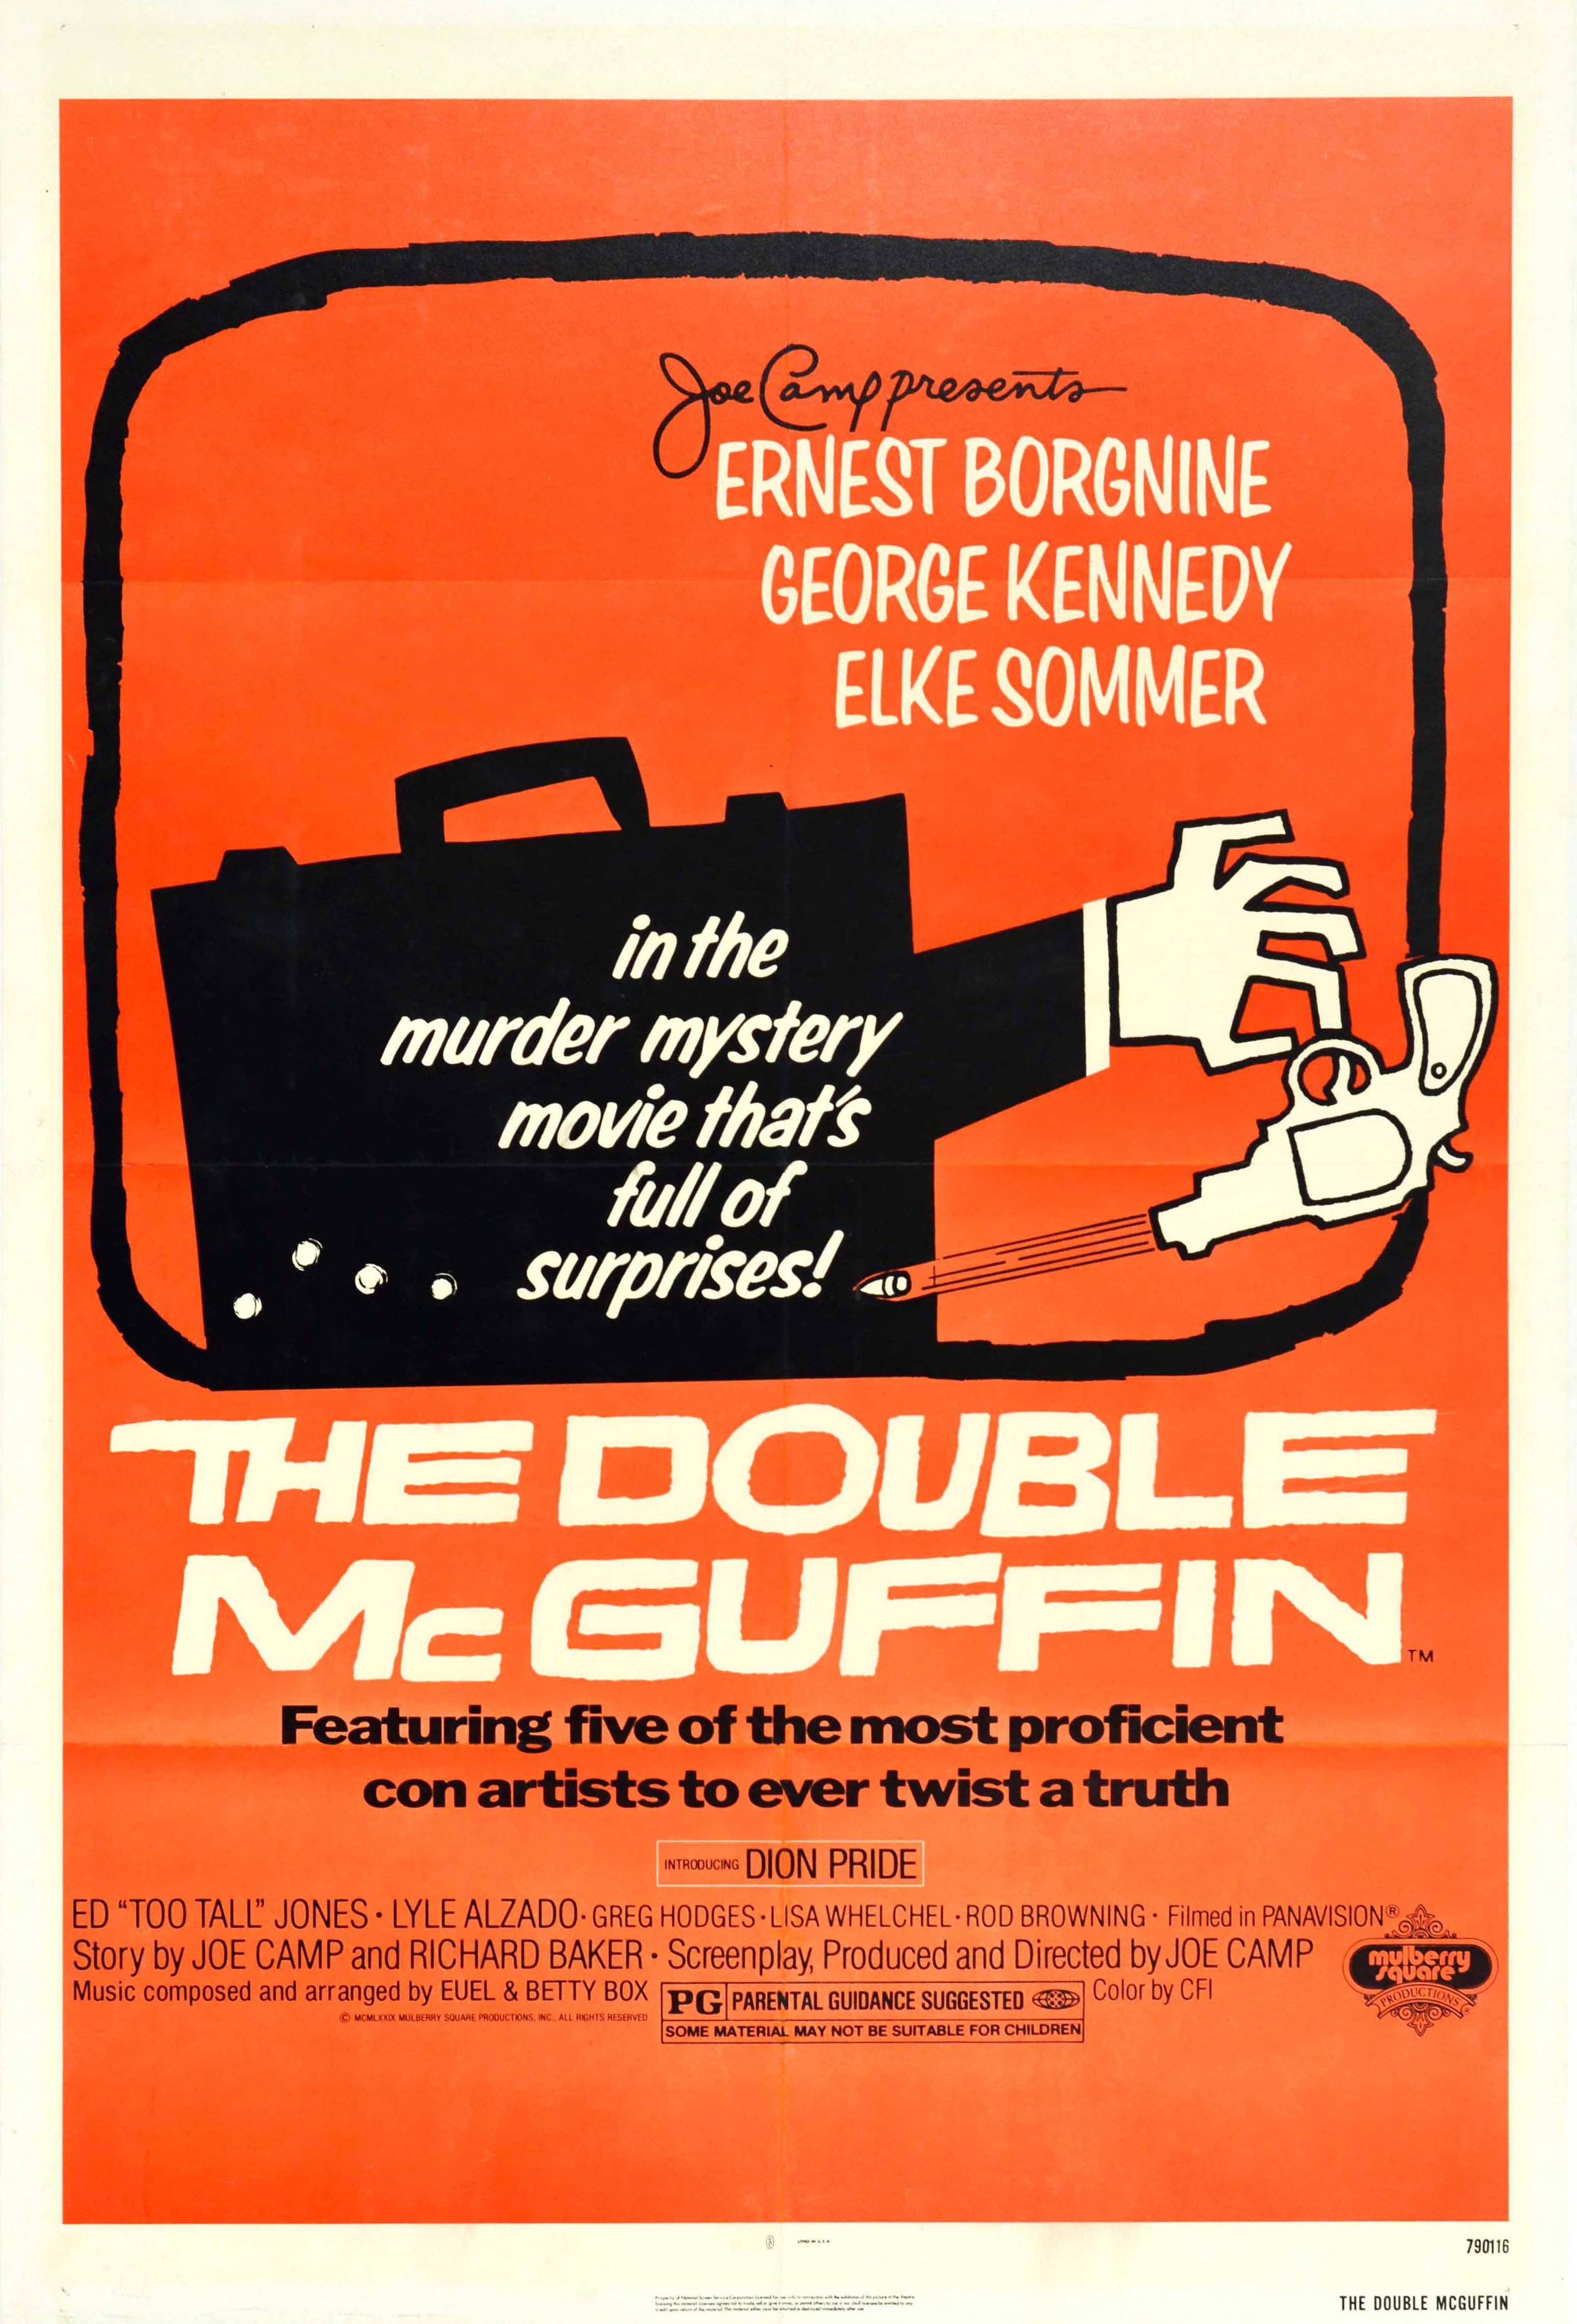 Saul Bass Print - Original Vintage Poster For The Double McGuffin Con Artists Murder Mystery Movie